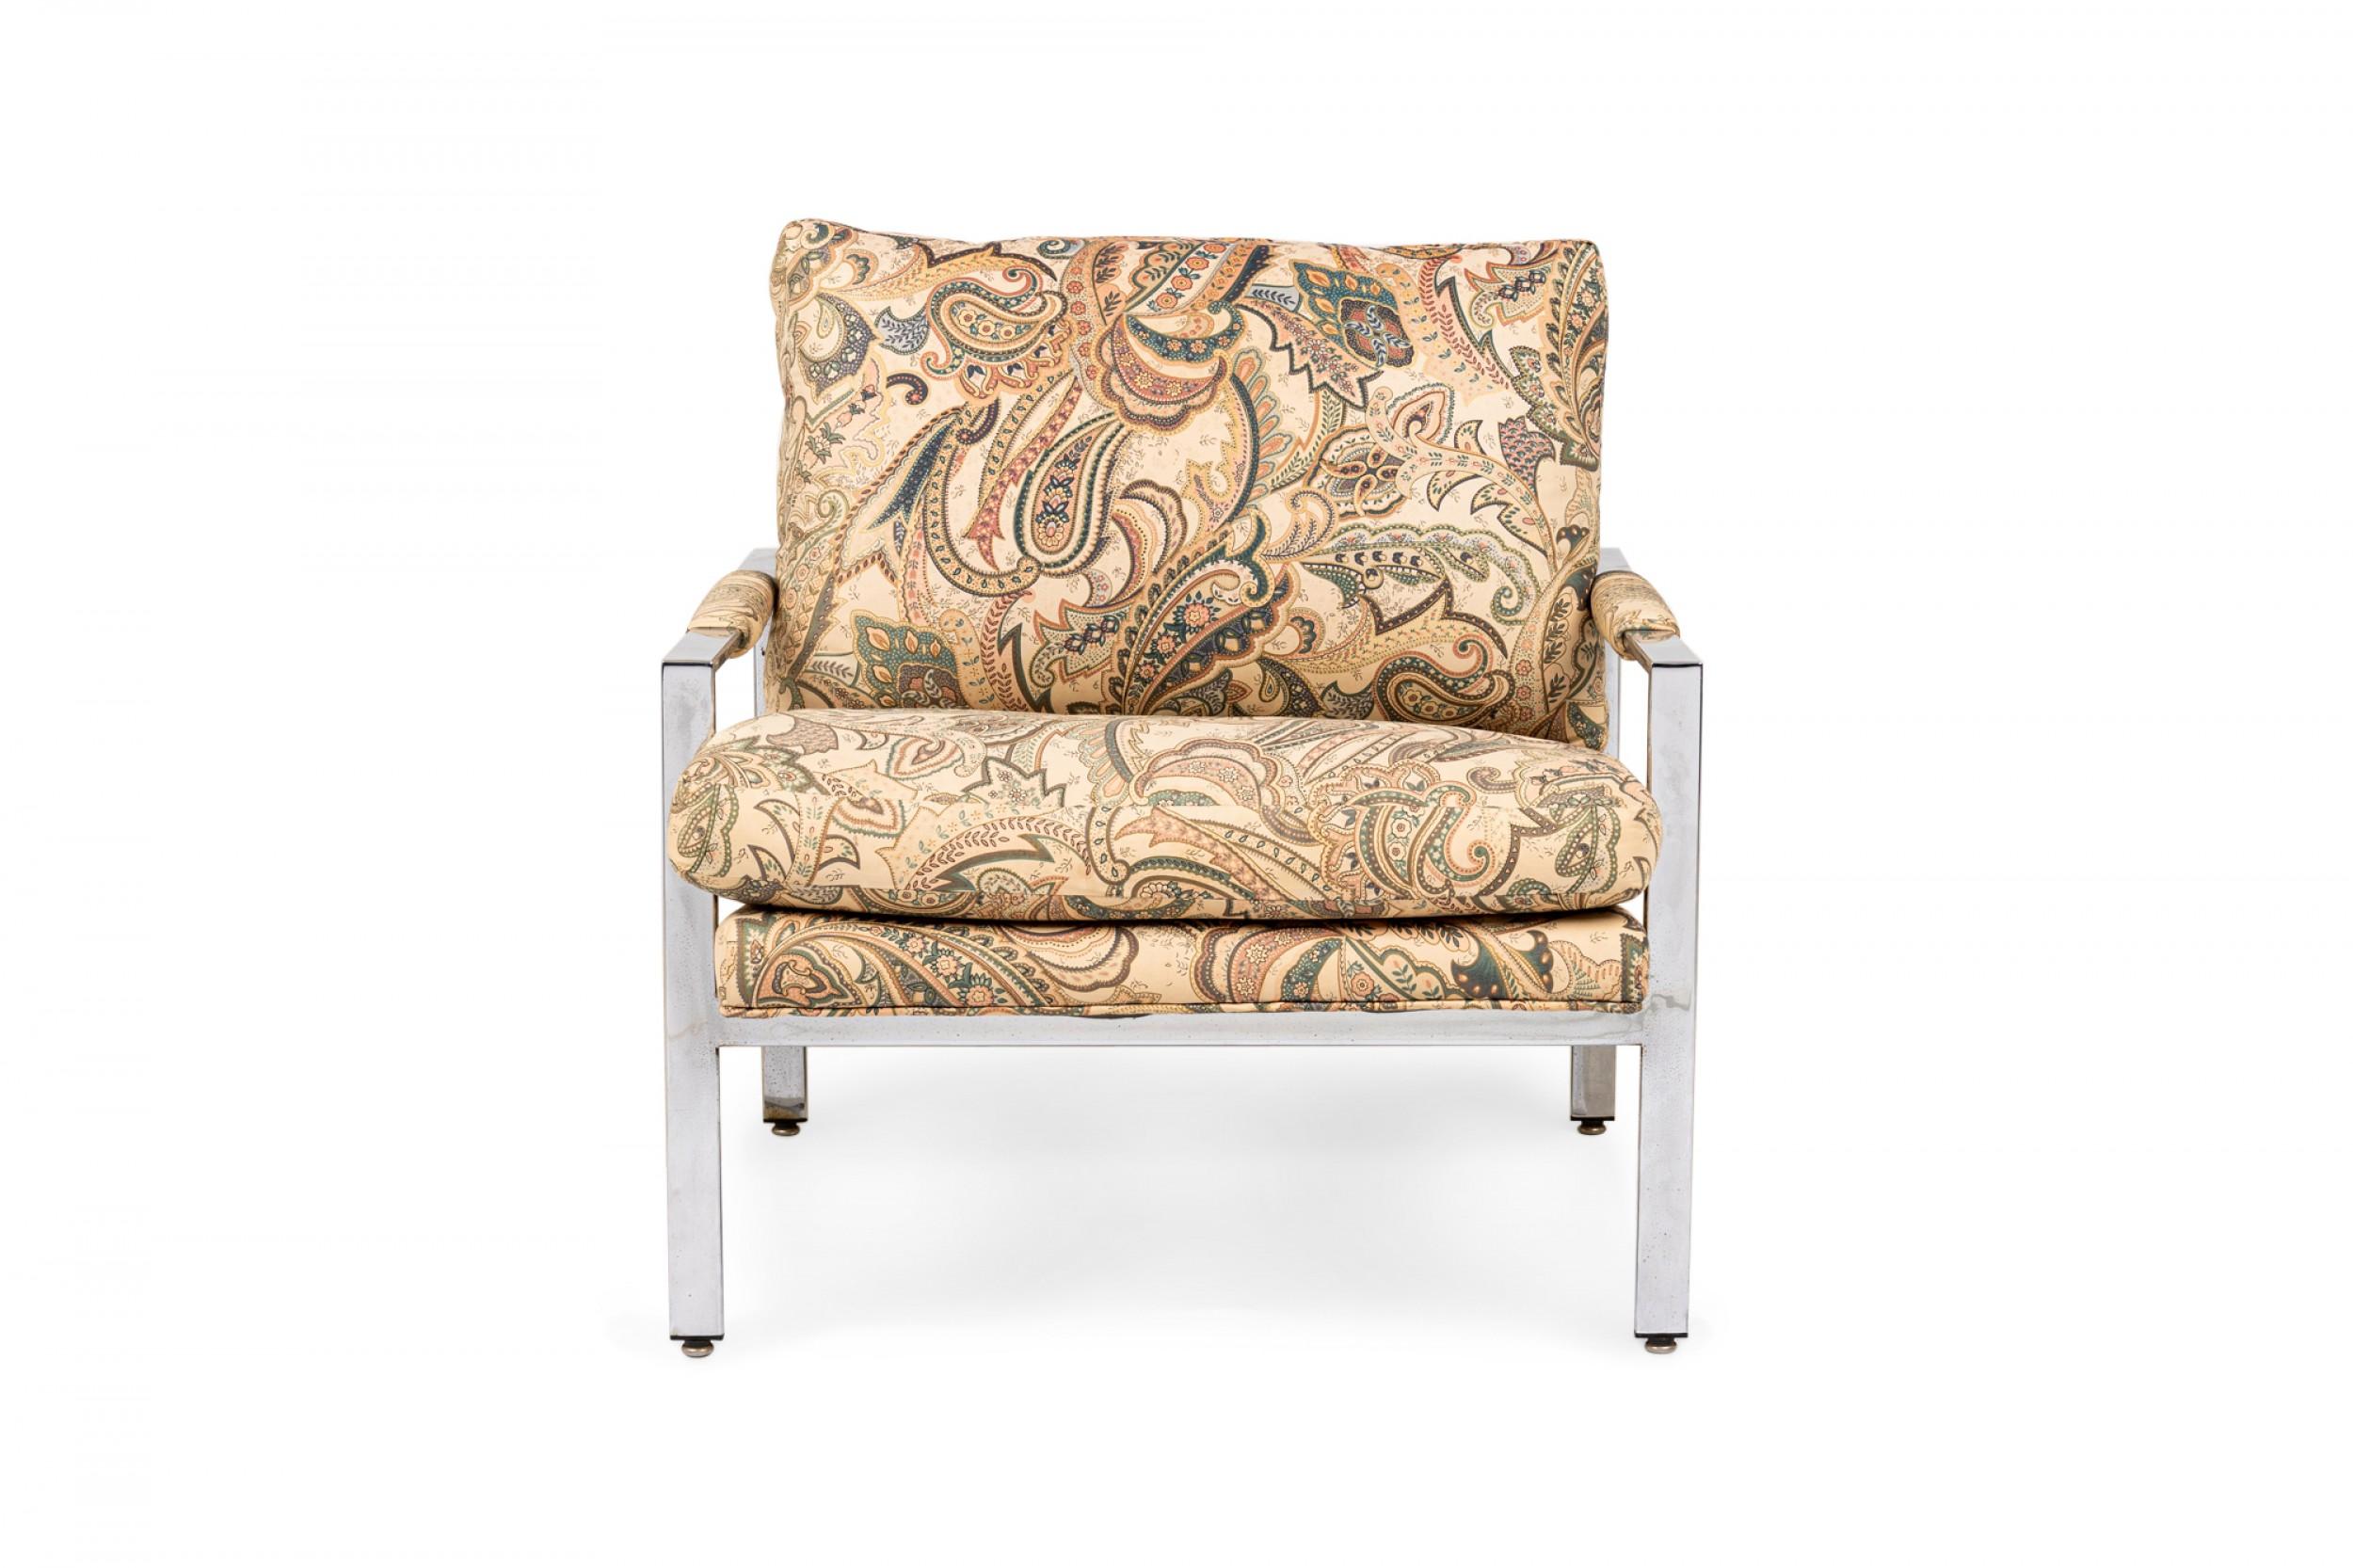 PAIR of American Mid-Century lounge armchairs with polished chrome flat bar frames, upholstered in a beige and neutral tone paisley patterned fabric. (Milo Baughman for Thayer Coggin)(Priced as Pair).